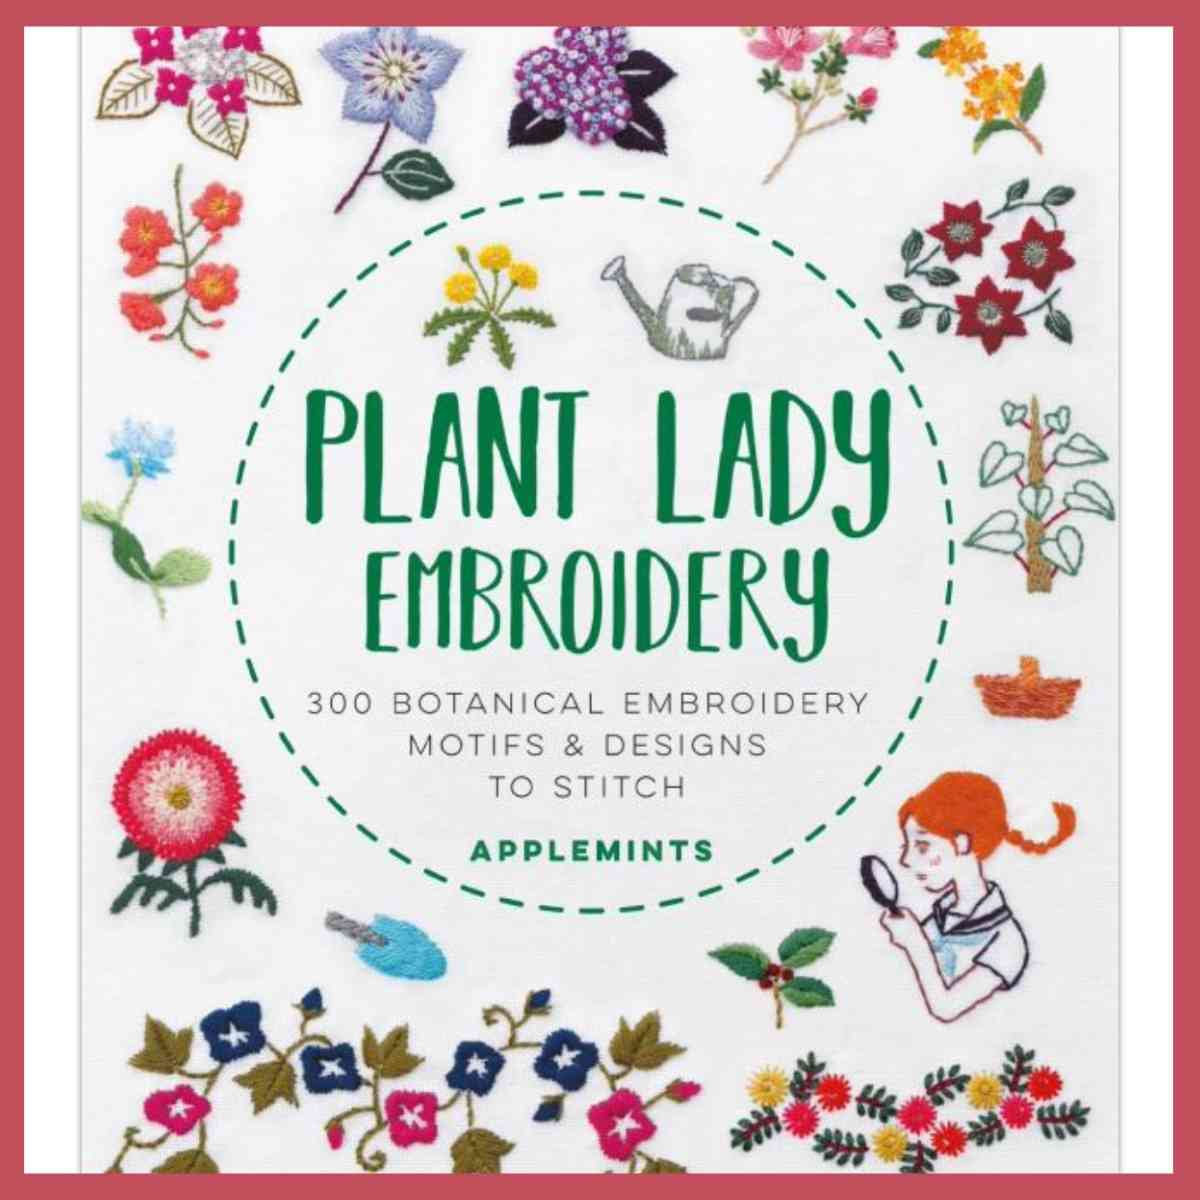 Plant Lady Embroidery book